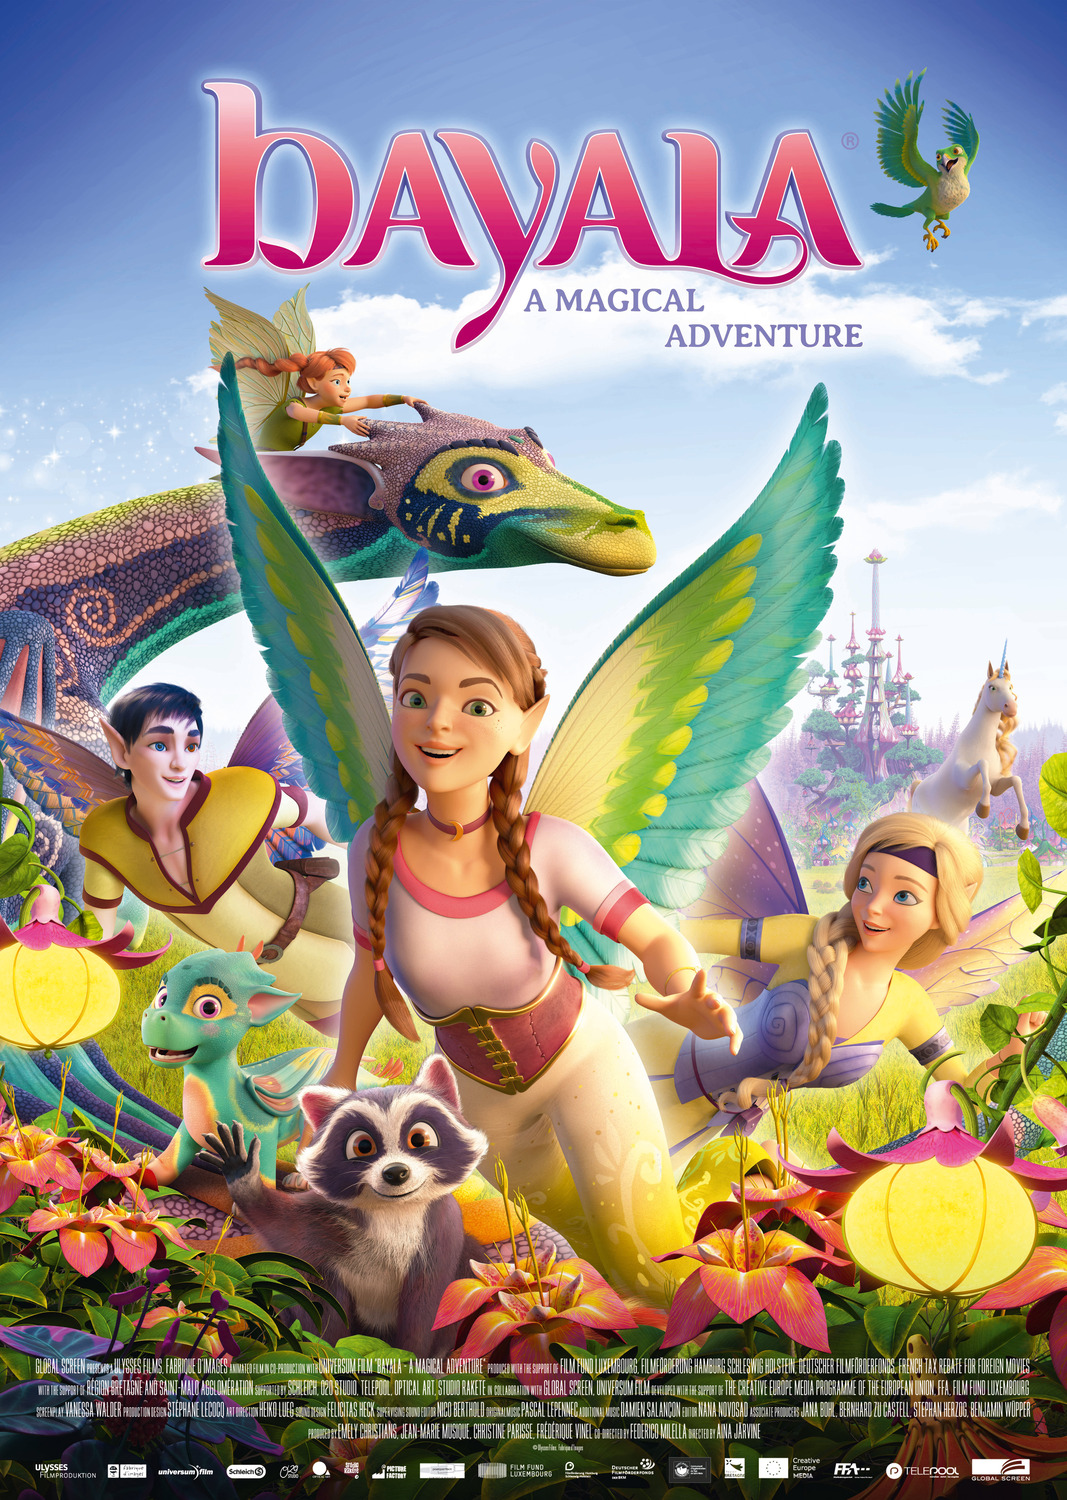 Extra Large Movie Poster Image for Bayala: A Magical Adventure (#1 of 2)